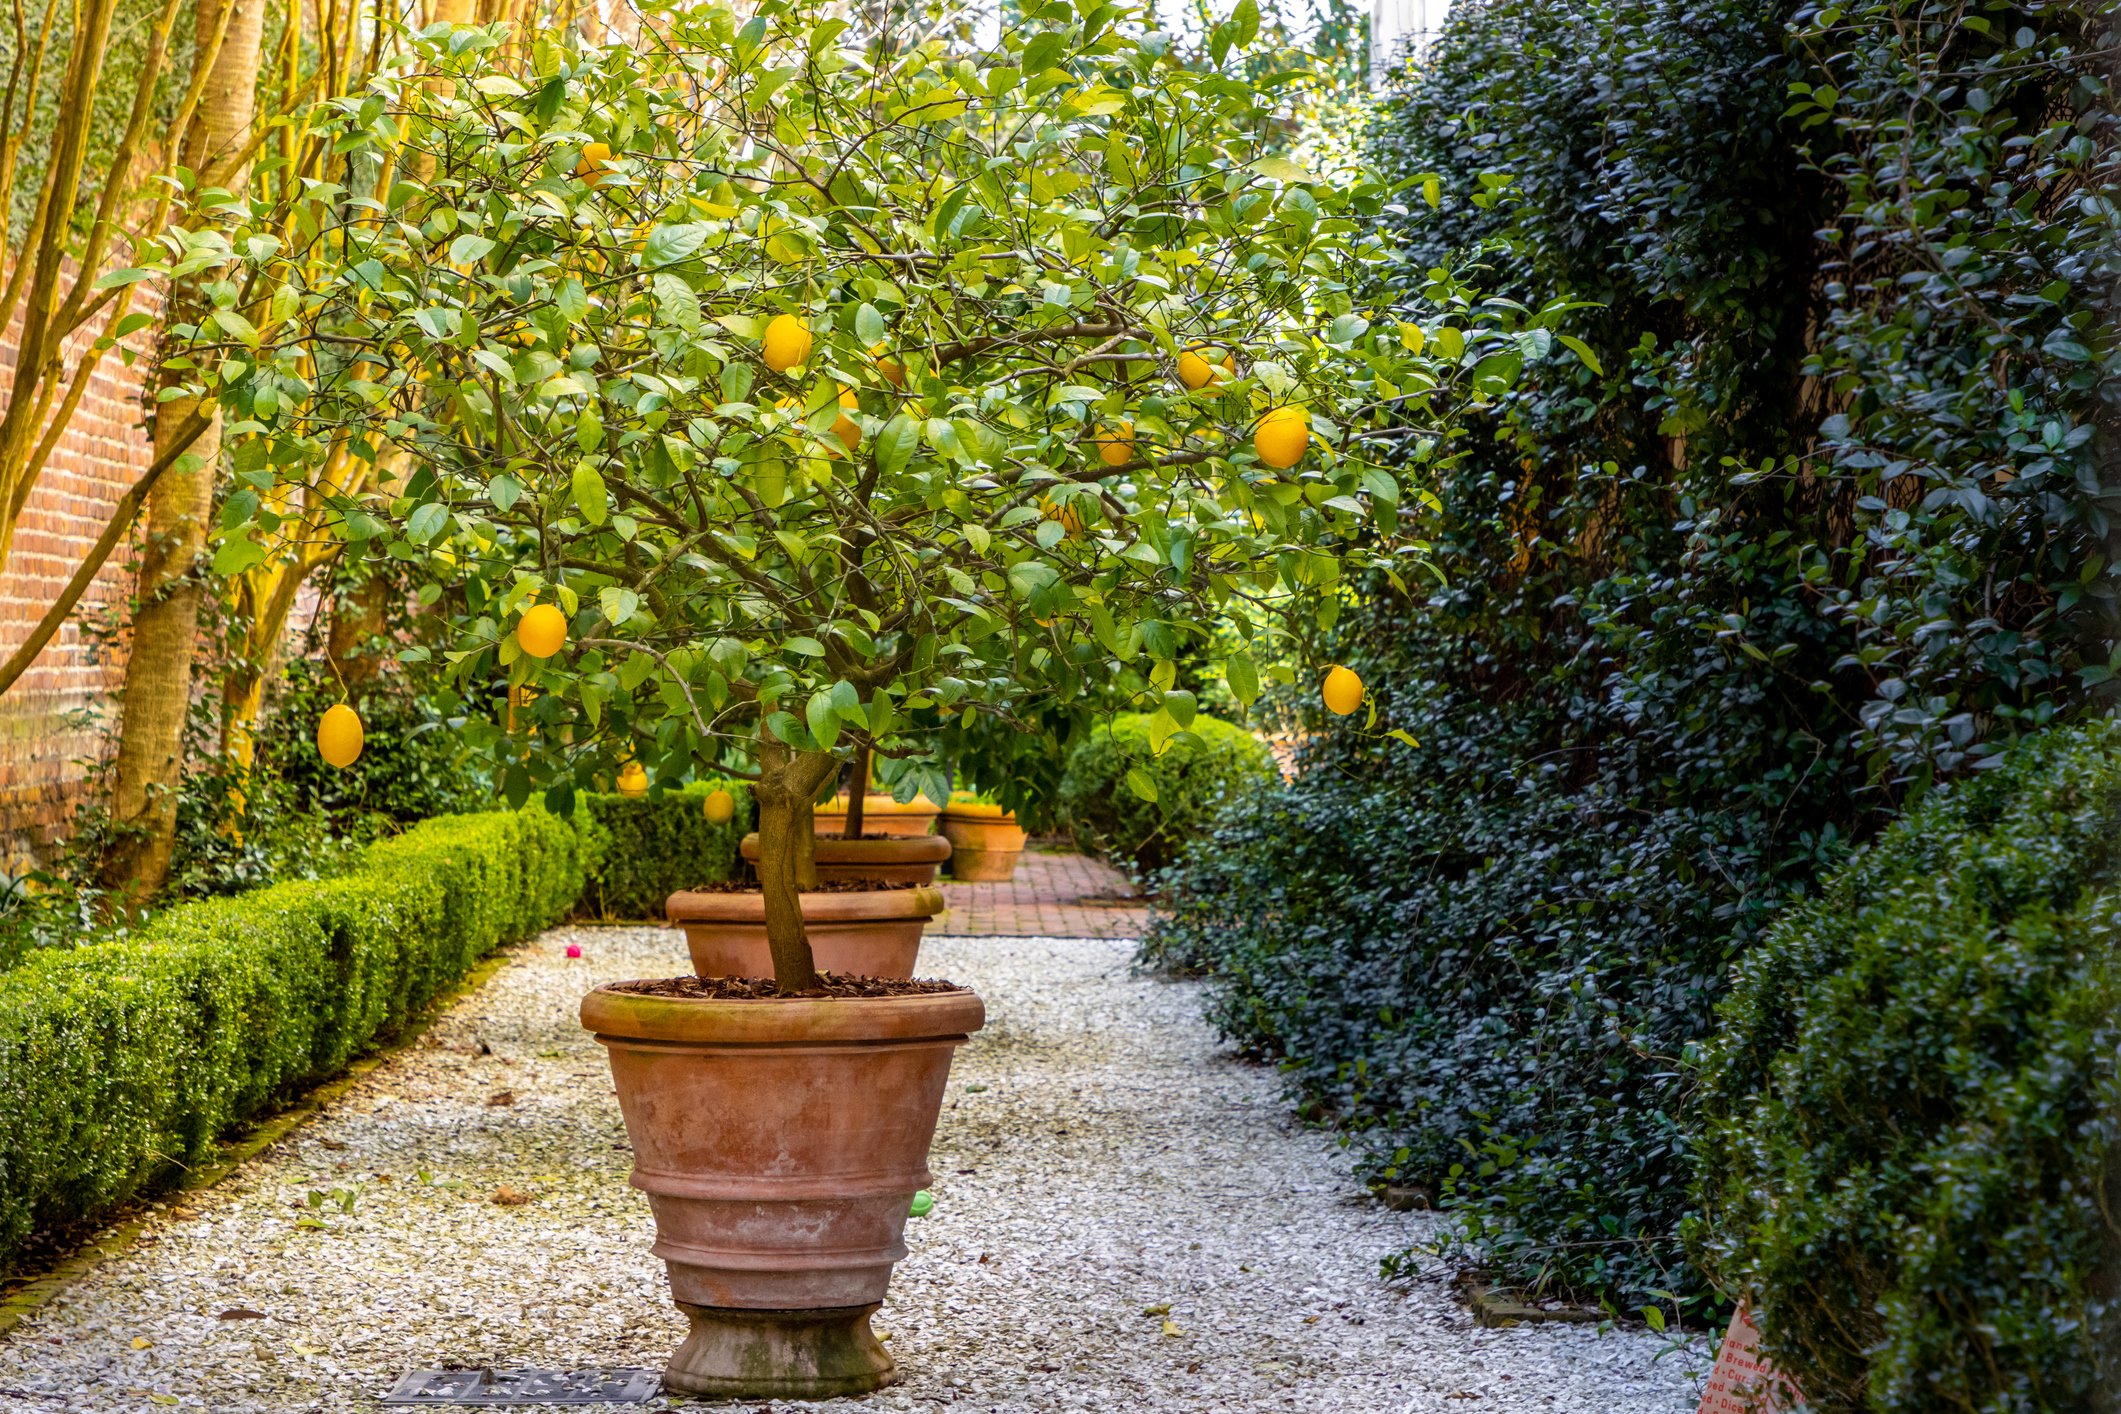 French garden design with citrus trees in pots